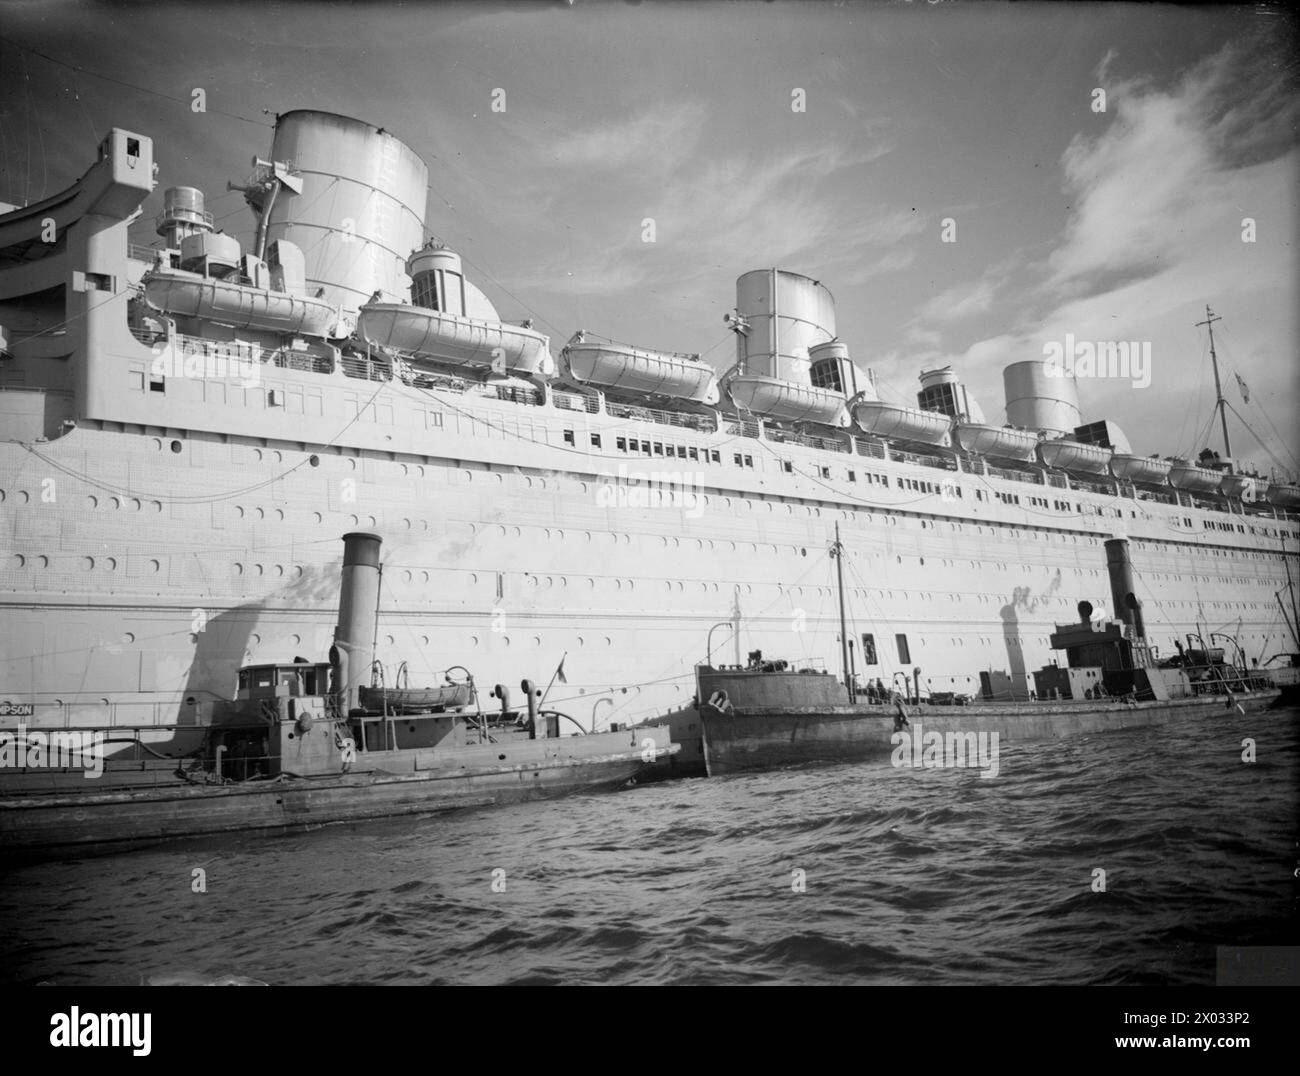 THE QUEEN MARY ON WAR SERVICE. 28 SEPTEMBER 1944, GREENOCK. THE 84000 TON CUNARD LINER QUEEN MARY IN HER GREY WHITE WAR PAINT AS SHE PREPARED TO MAKE ANOTHER ATLANTIC CROSSING TAKING WOUNDED US TROOPS BACK TO AMERICA. - In her war paint with attendant harbour vessels alongside Stock Photo